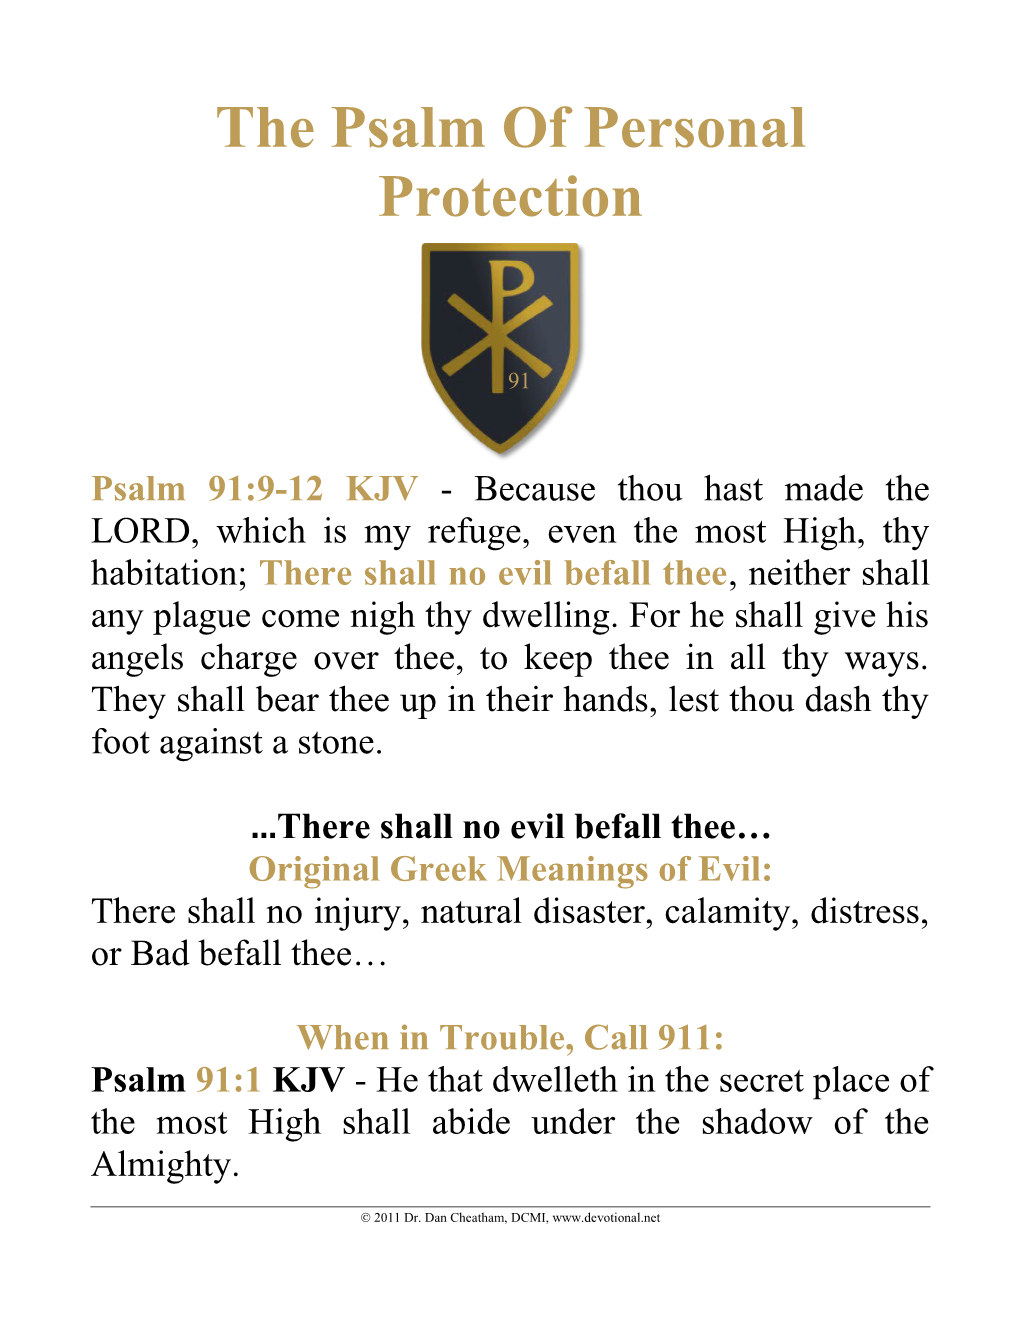 The Psalm of Personal Protection